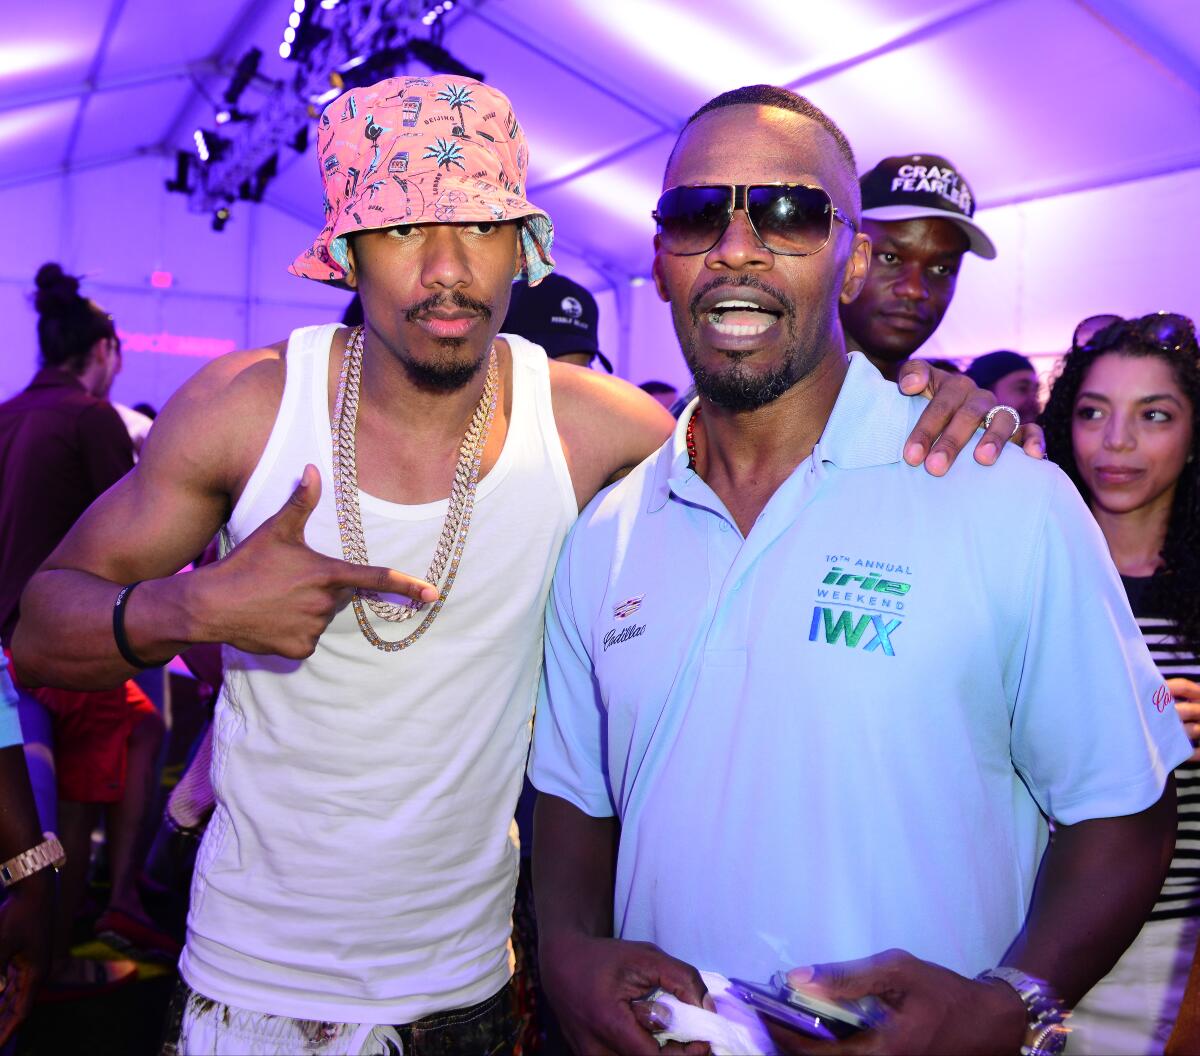 Framed waist up, Nick Cannon and Jamie Foxx pose for a photo together. 